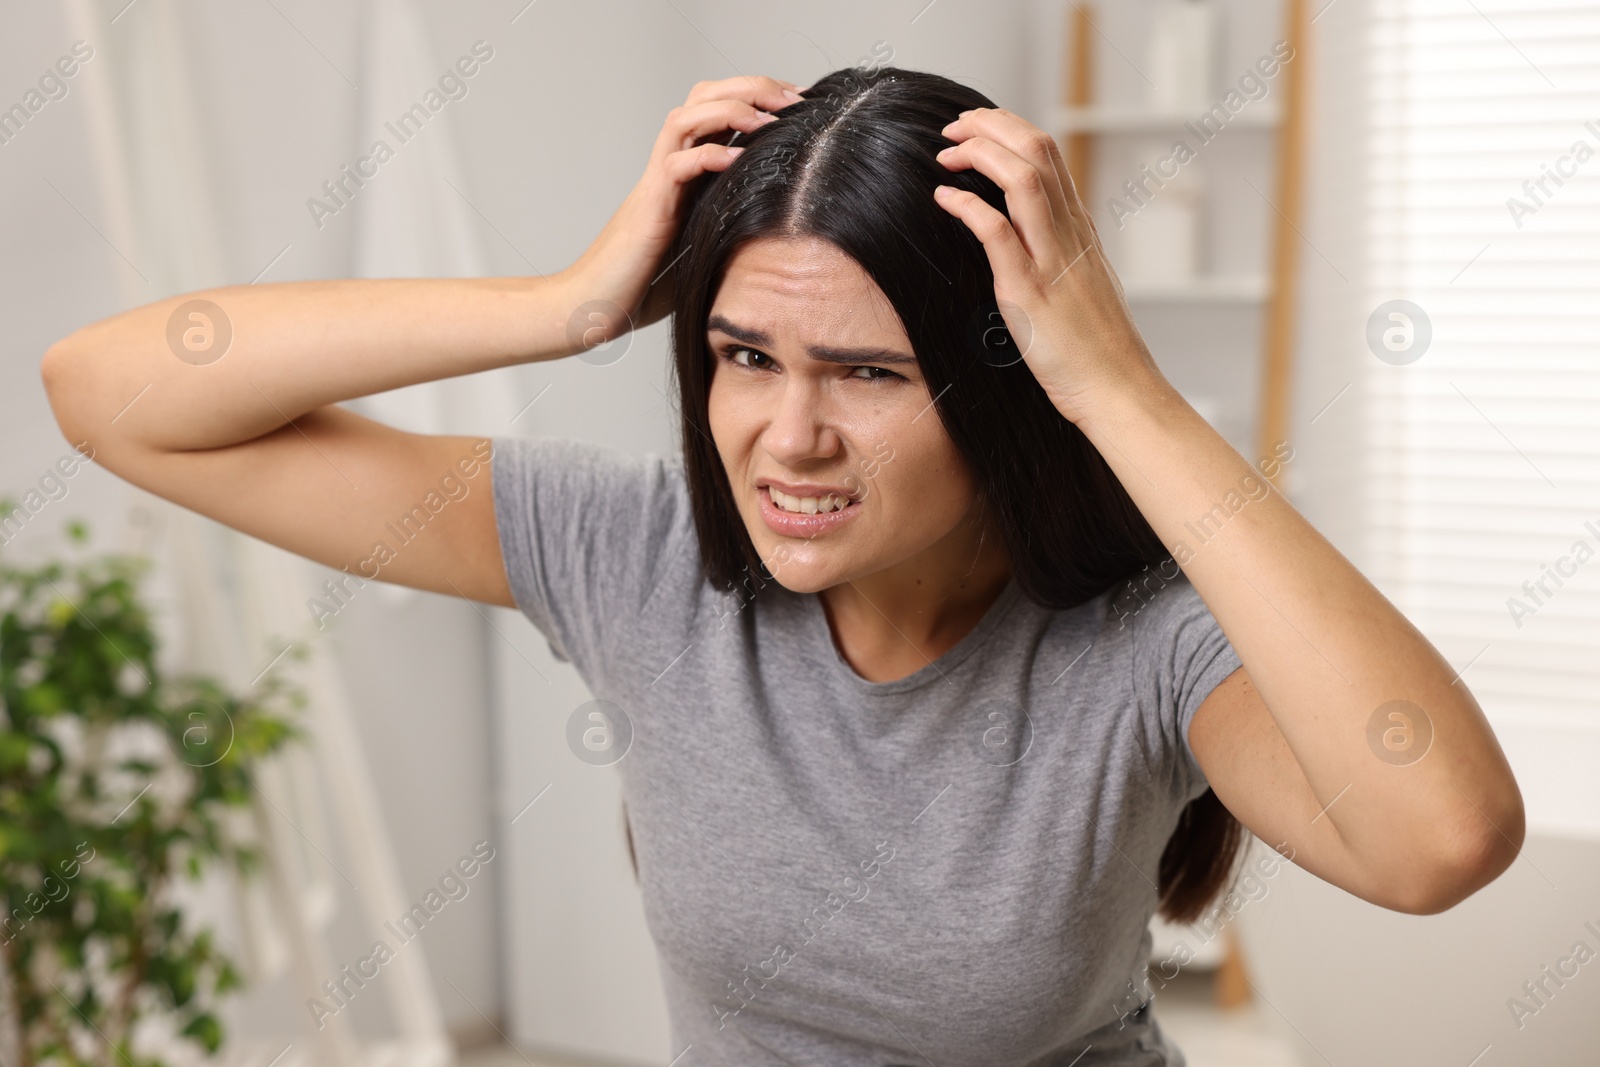 Photo of Emotional woman examining her hair and scalp in bathroom. Dandruff problem